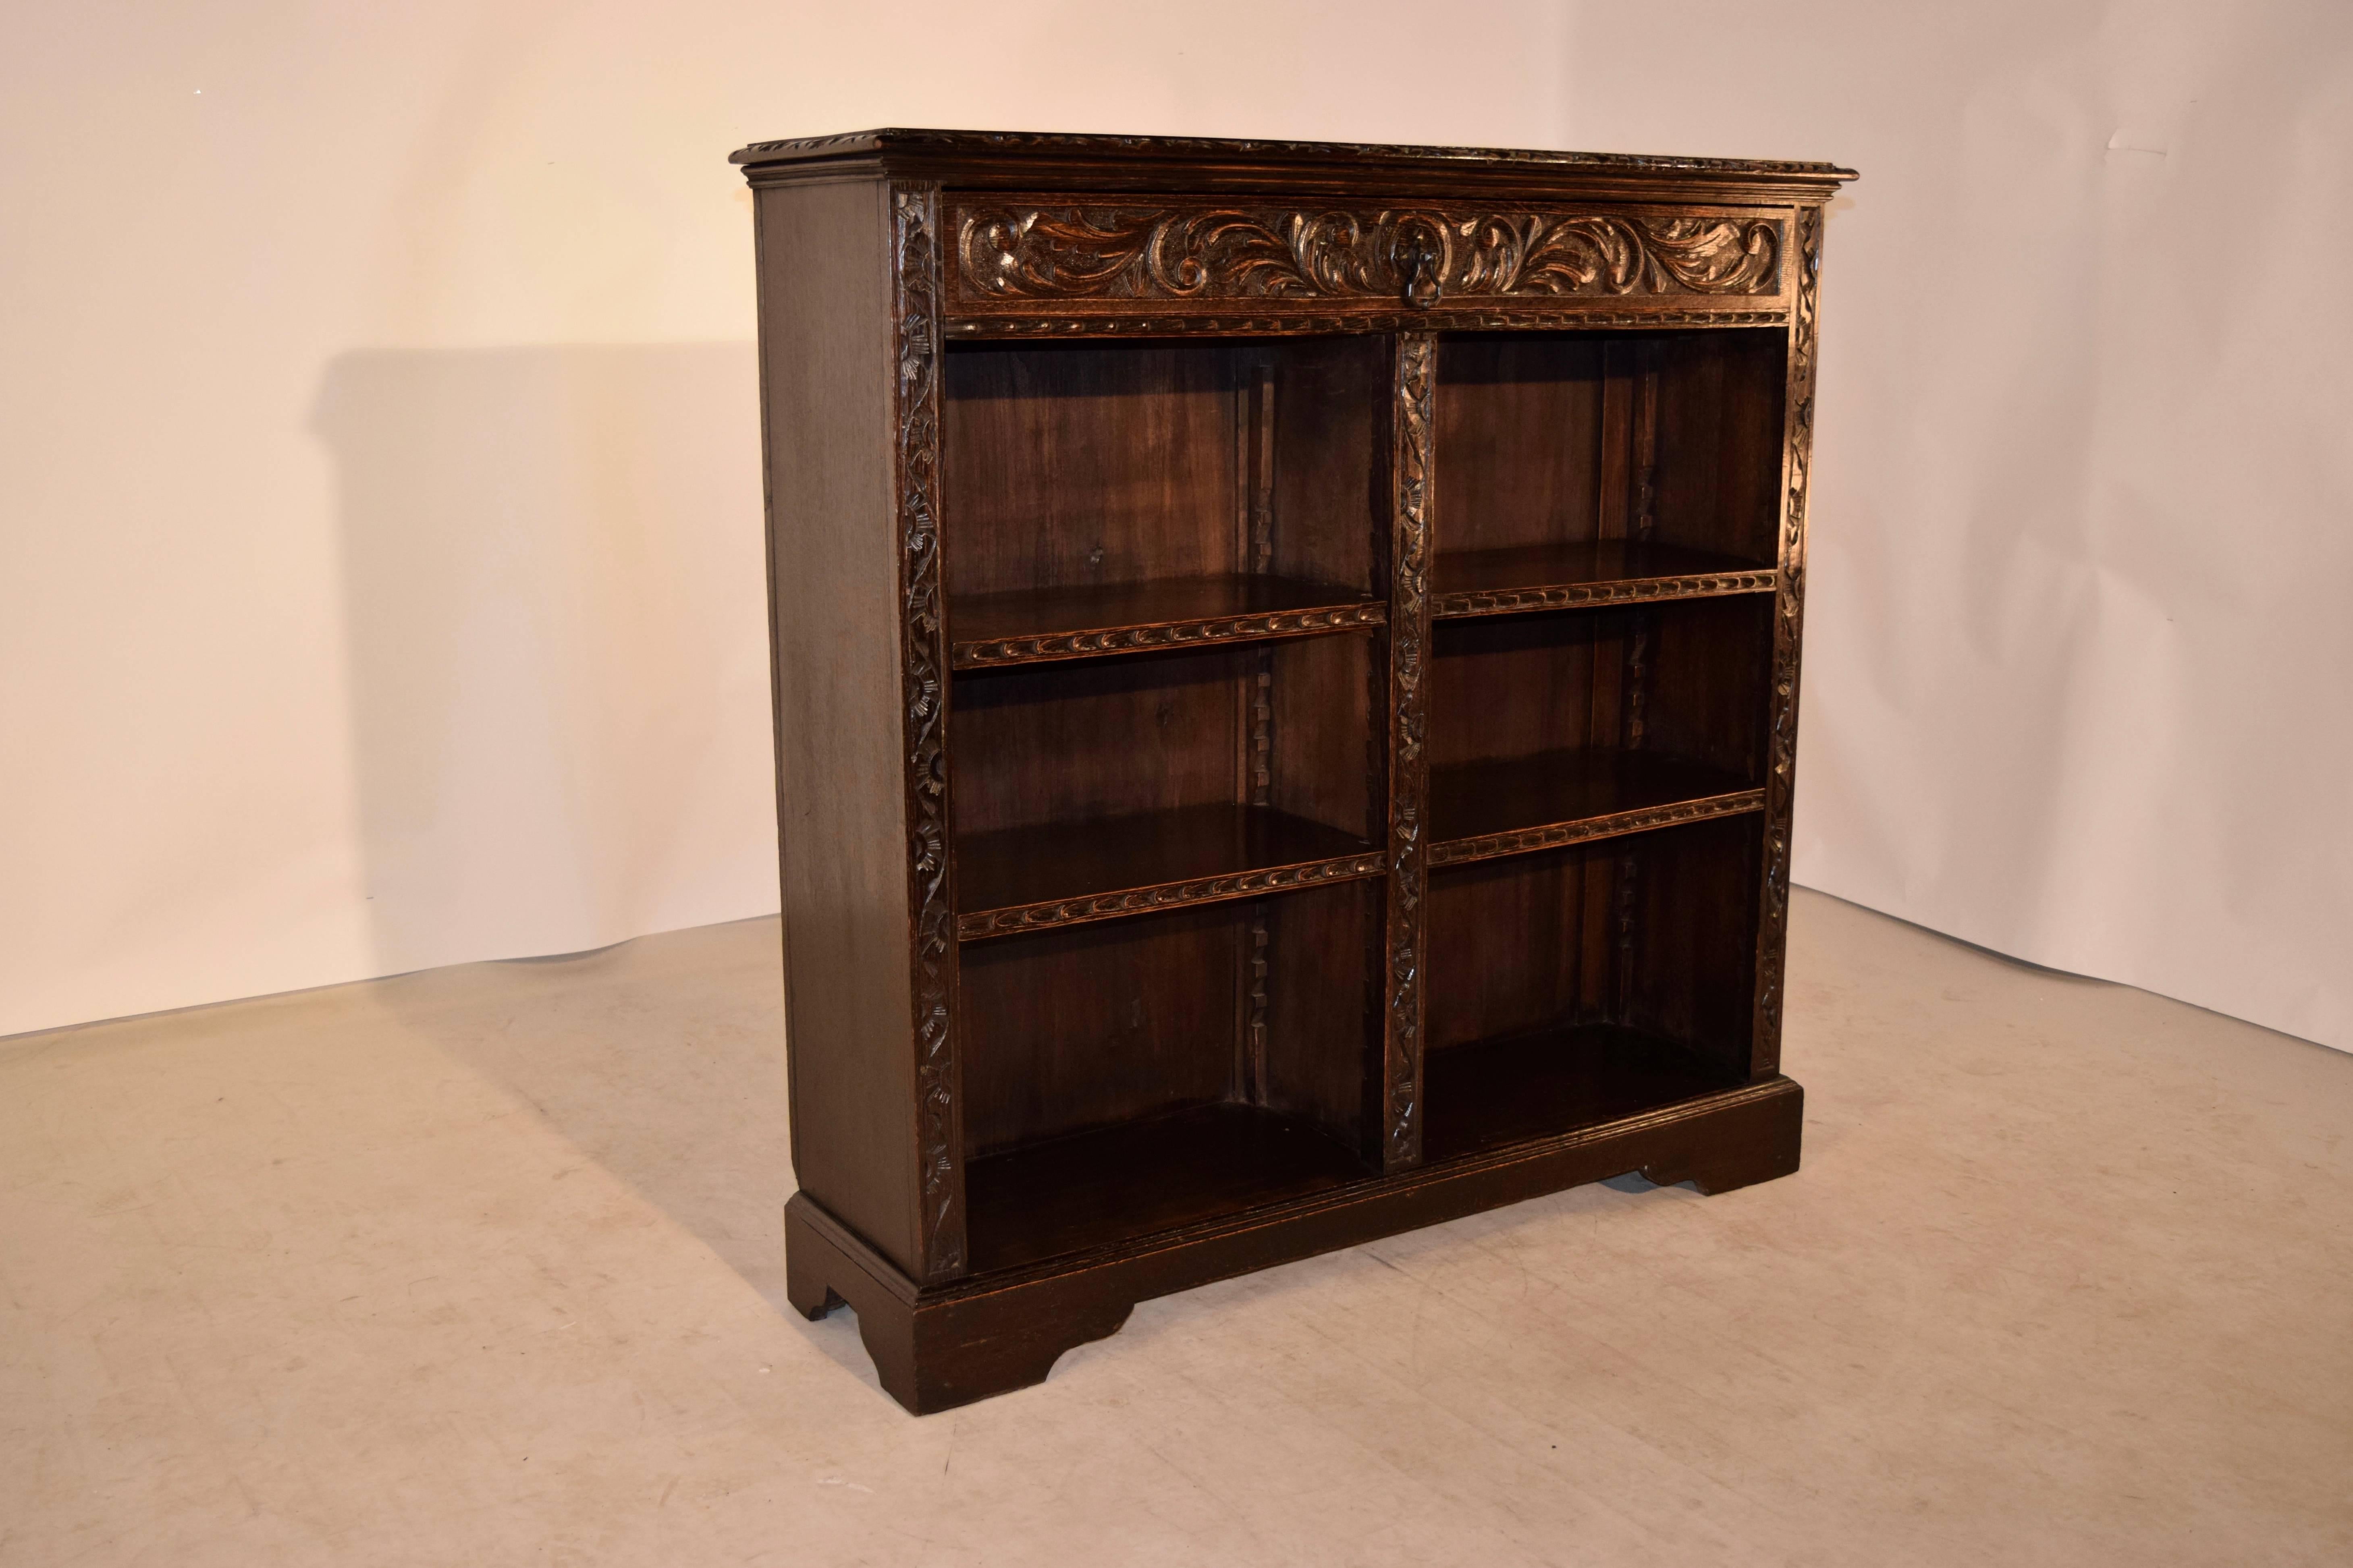 19th century English oak bookcase with a bevelled and gadrroned edge around the top, following down to a single drawer at the top, over four adjustable shelves, all with hand-carved front edges. The case has matching carving on the side and centre